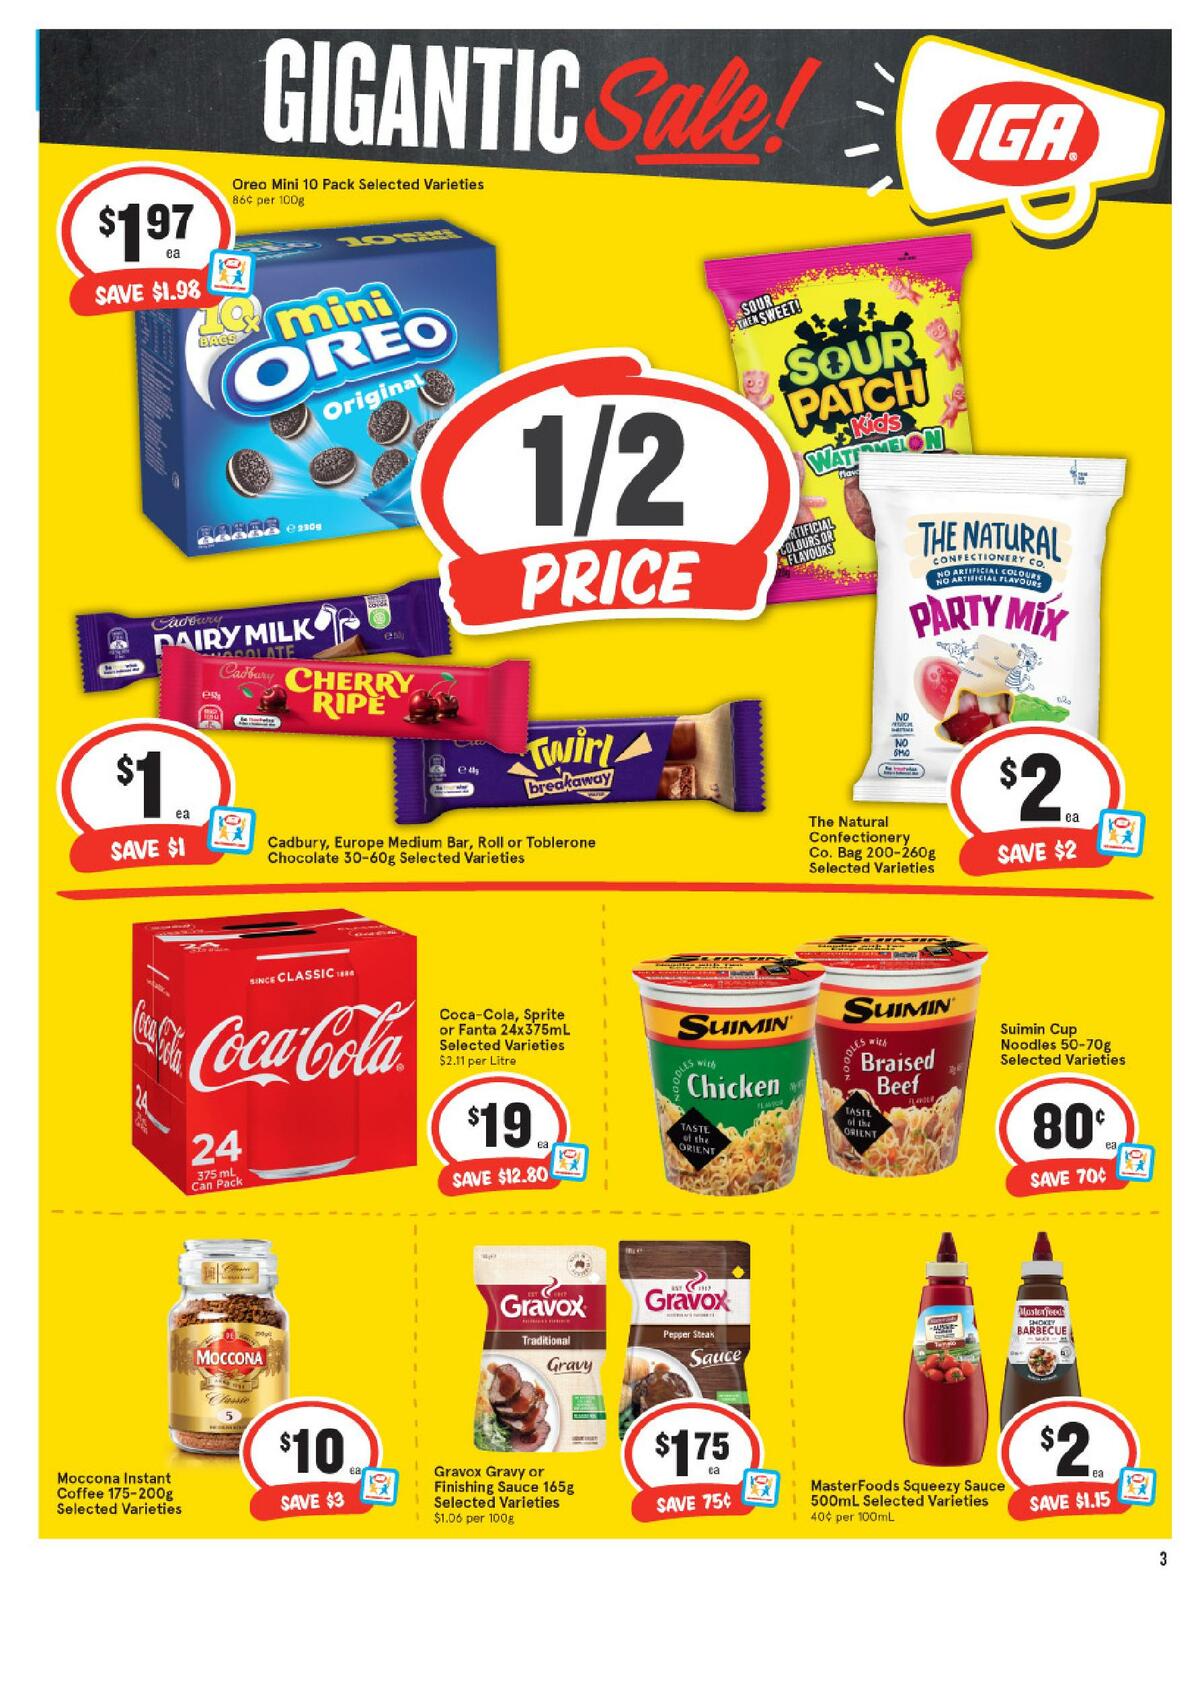 IGA Catalogues from 16 June